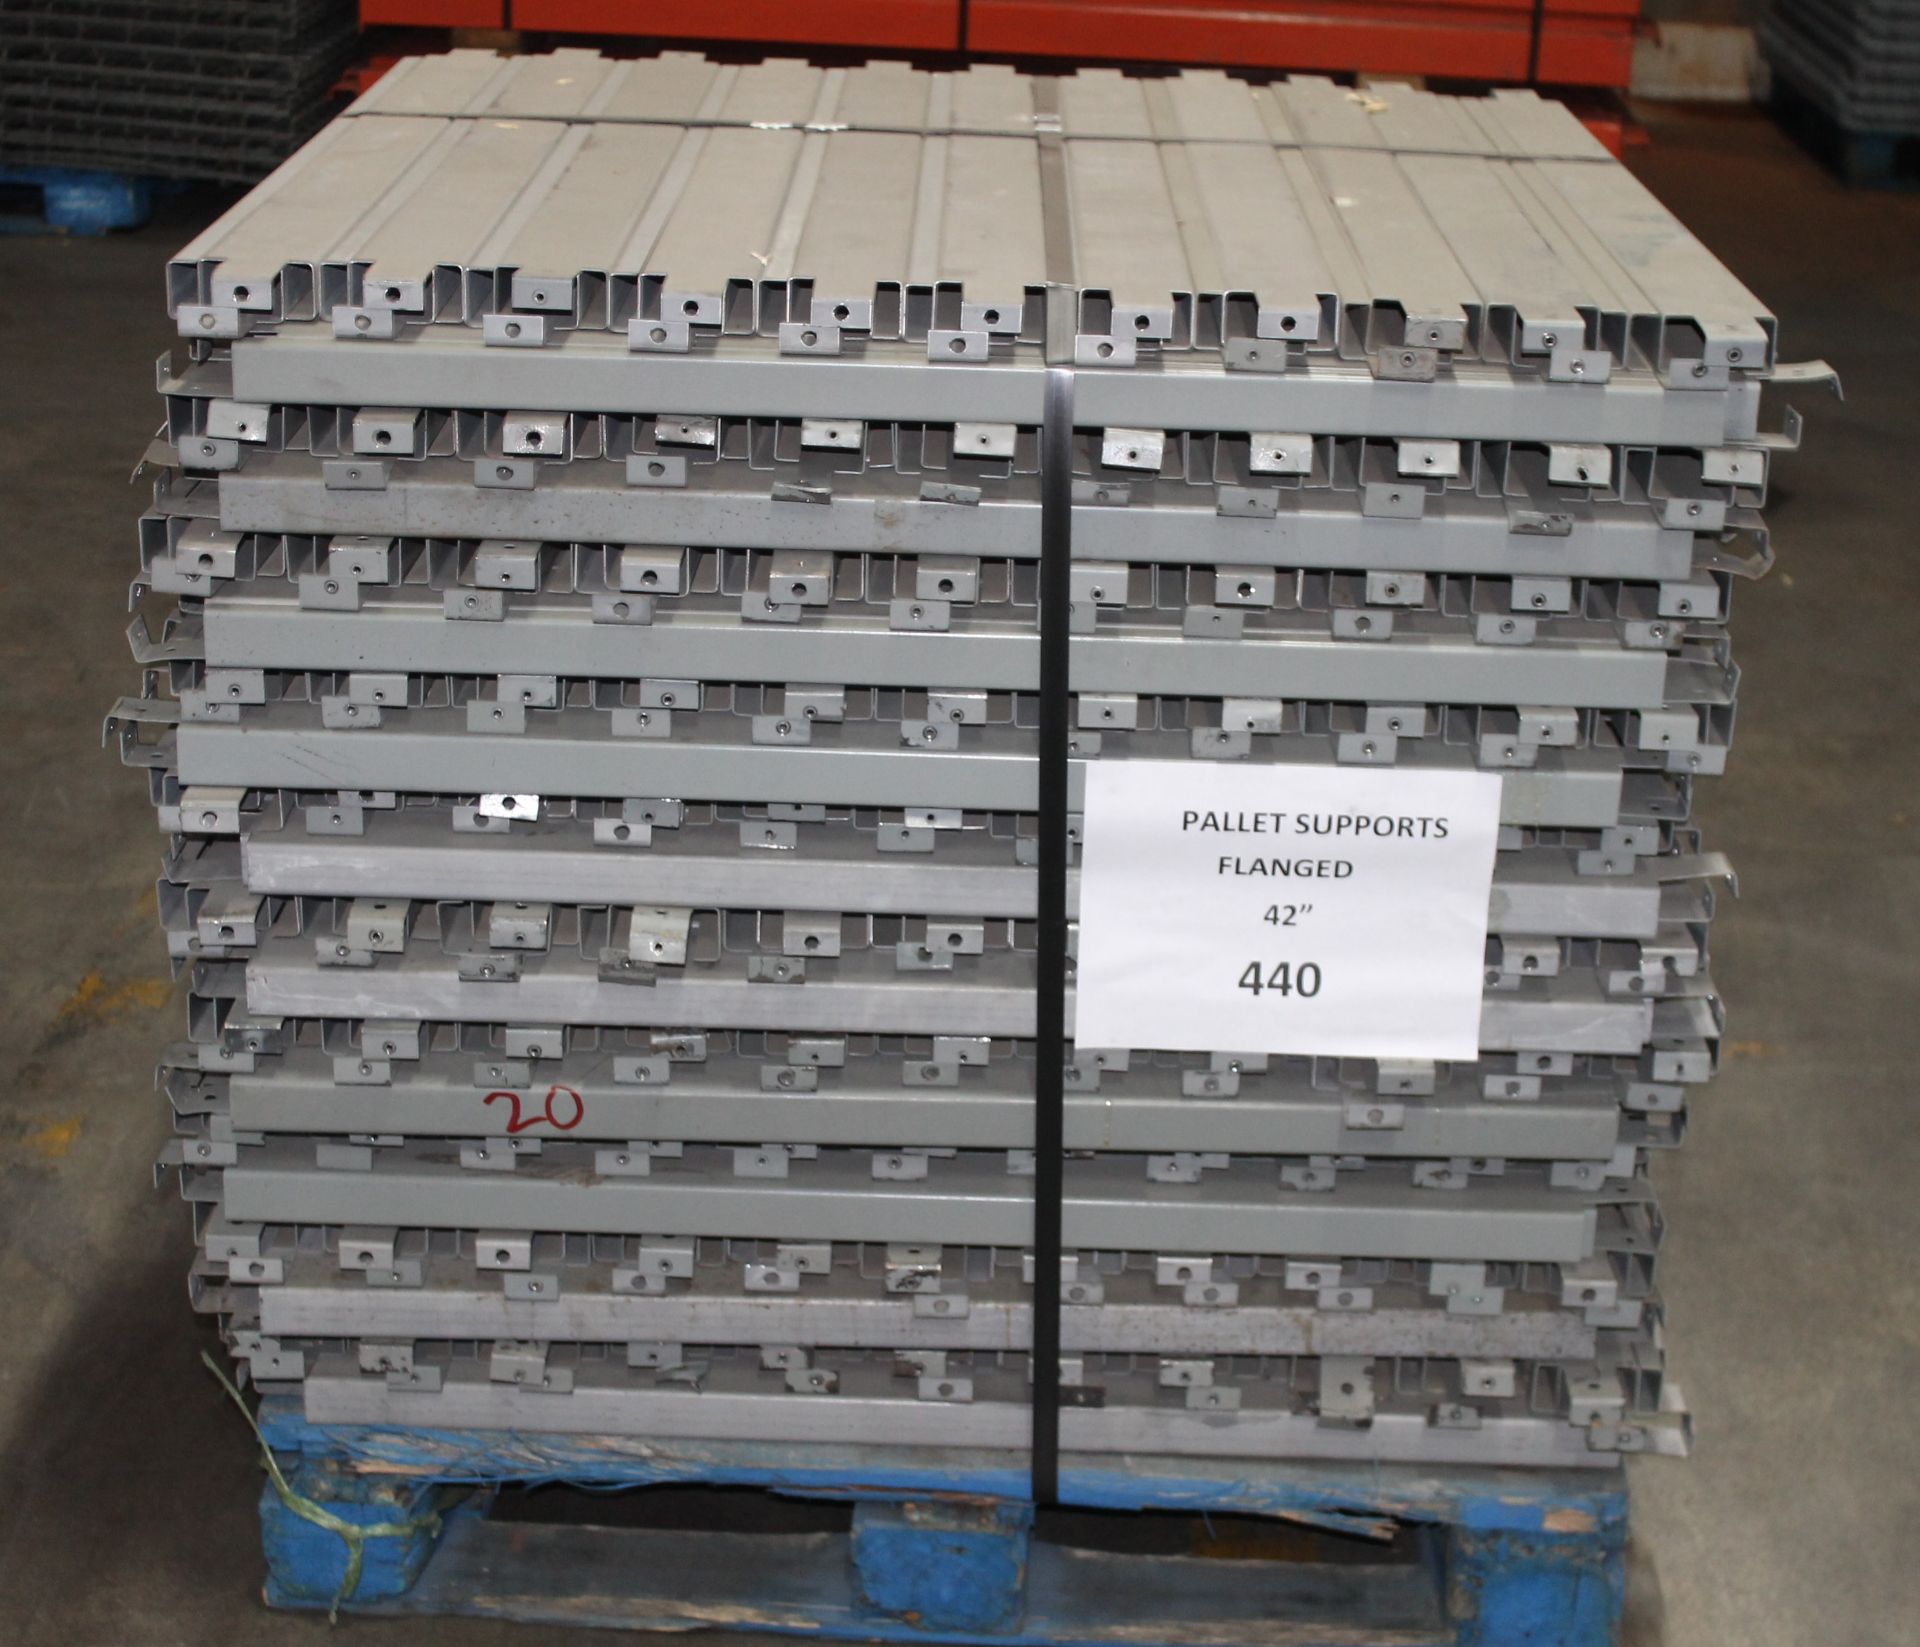 440 PCS OF 42"" FLANGED METAL PALLET SUPPORTS FOR 42" DEEP UPRIGHT.